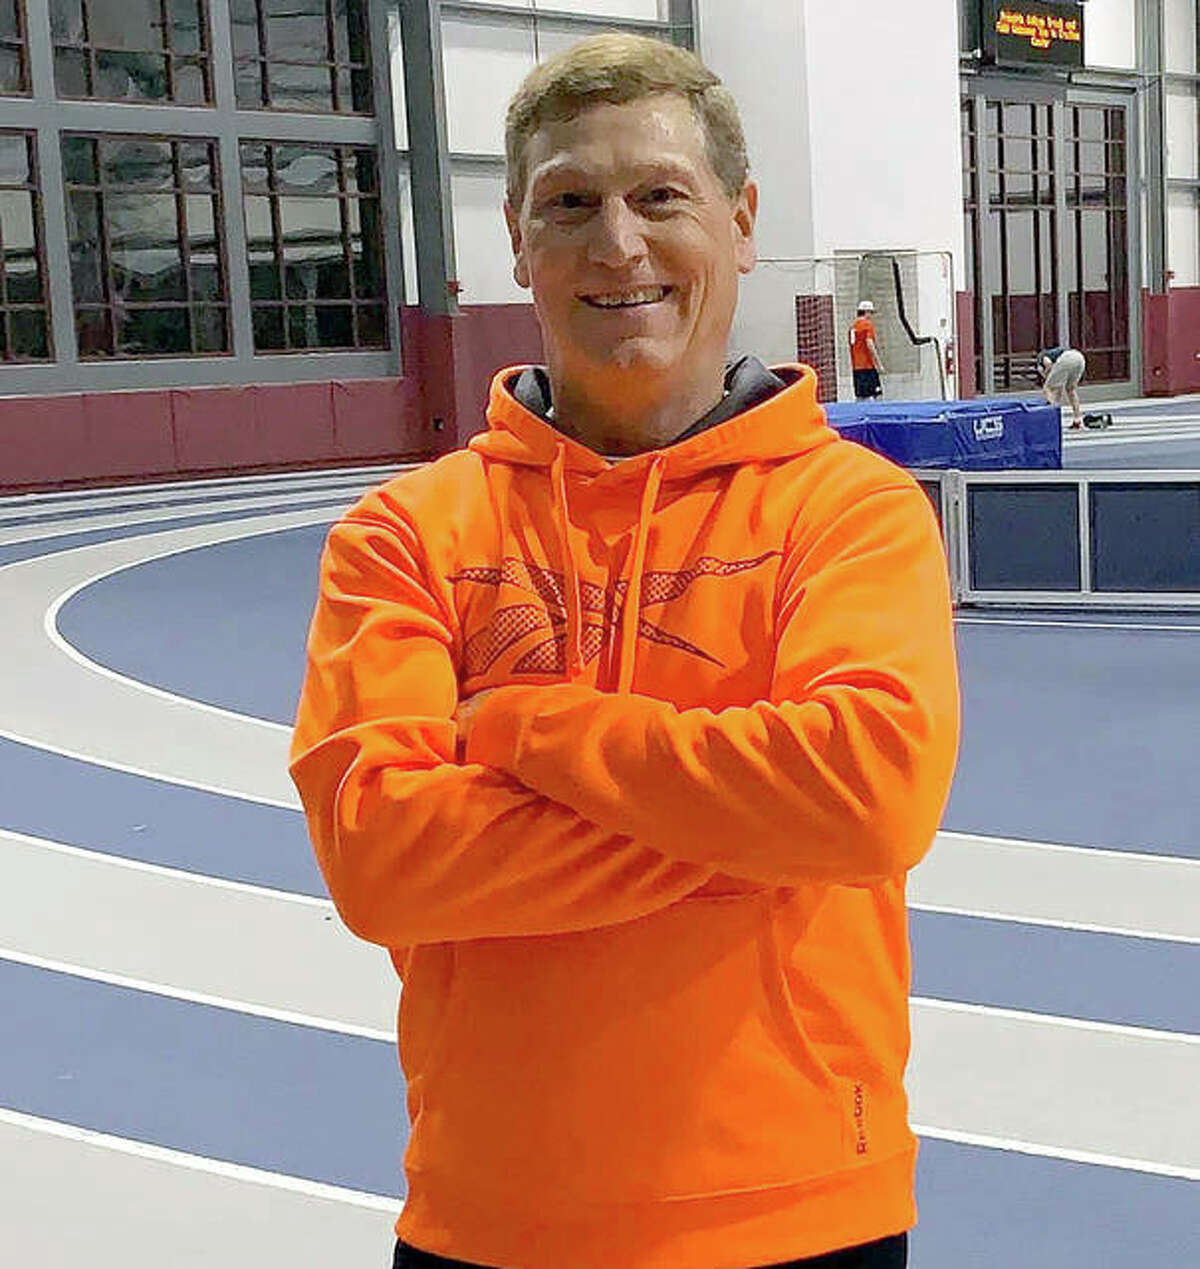 Mike Young of Wood River, 58, ran the world’s top 55-meter dash time of the young season at the recent Wisconsin Indoor Track and Field Championships at Carthage College in Kenosha, Wisconsin to earn All-America status in the event. He captured gold medals in all six events in which he participated.